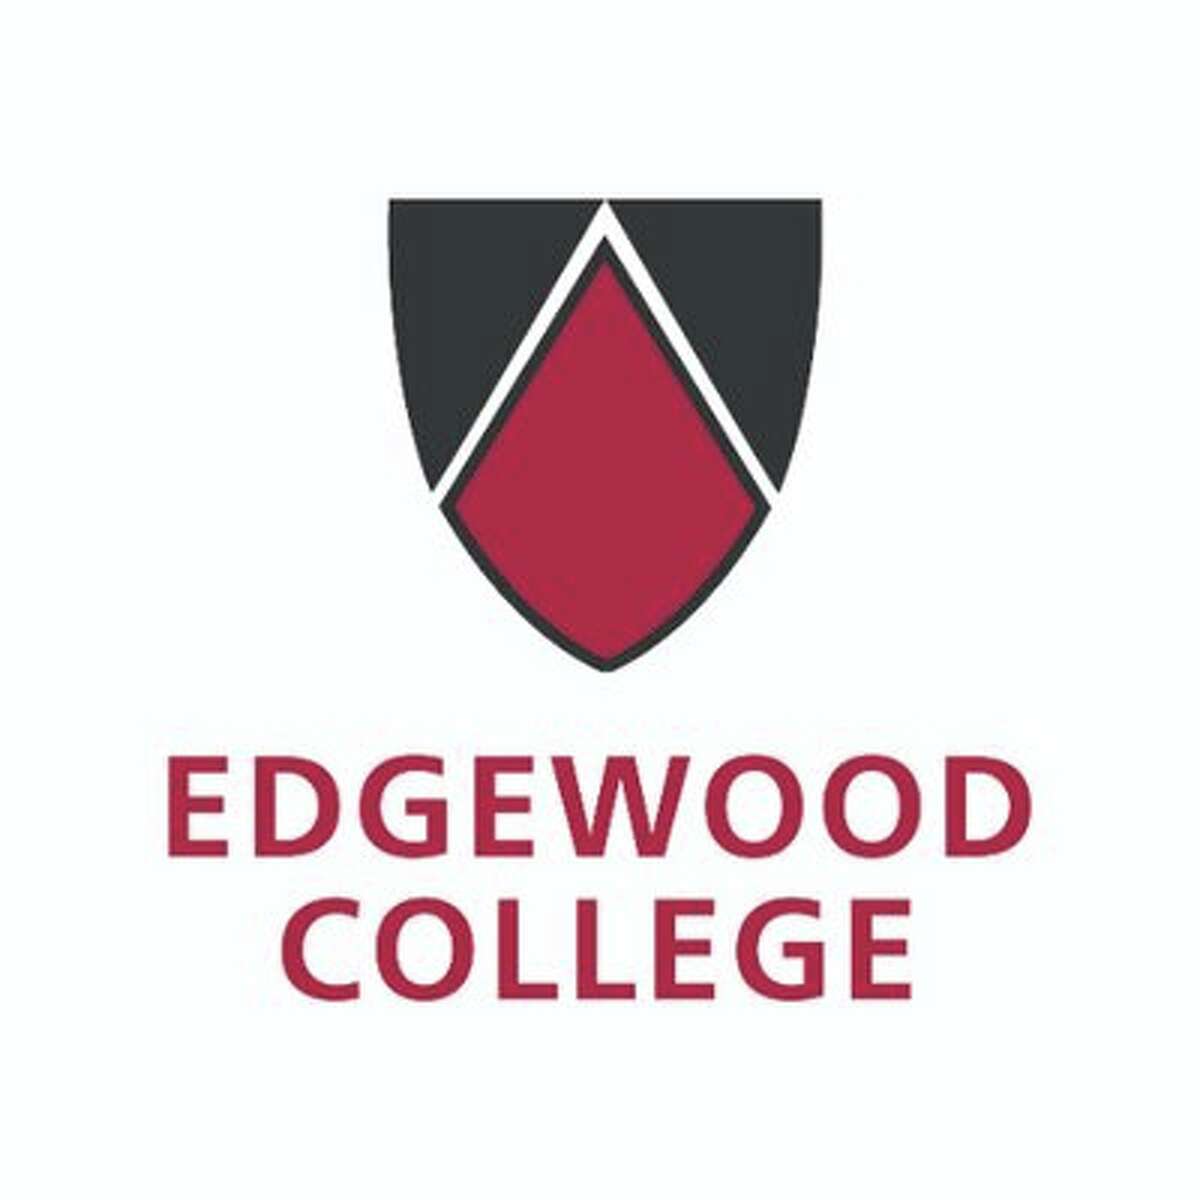 Edgewood College released its academic honors. 